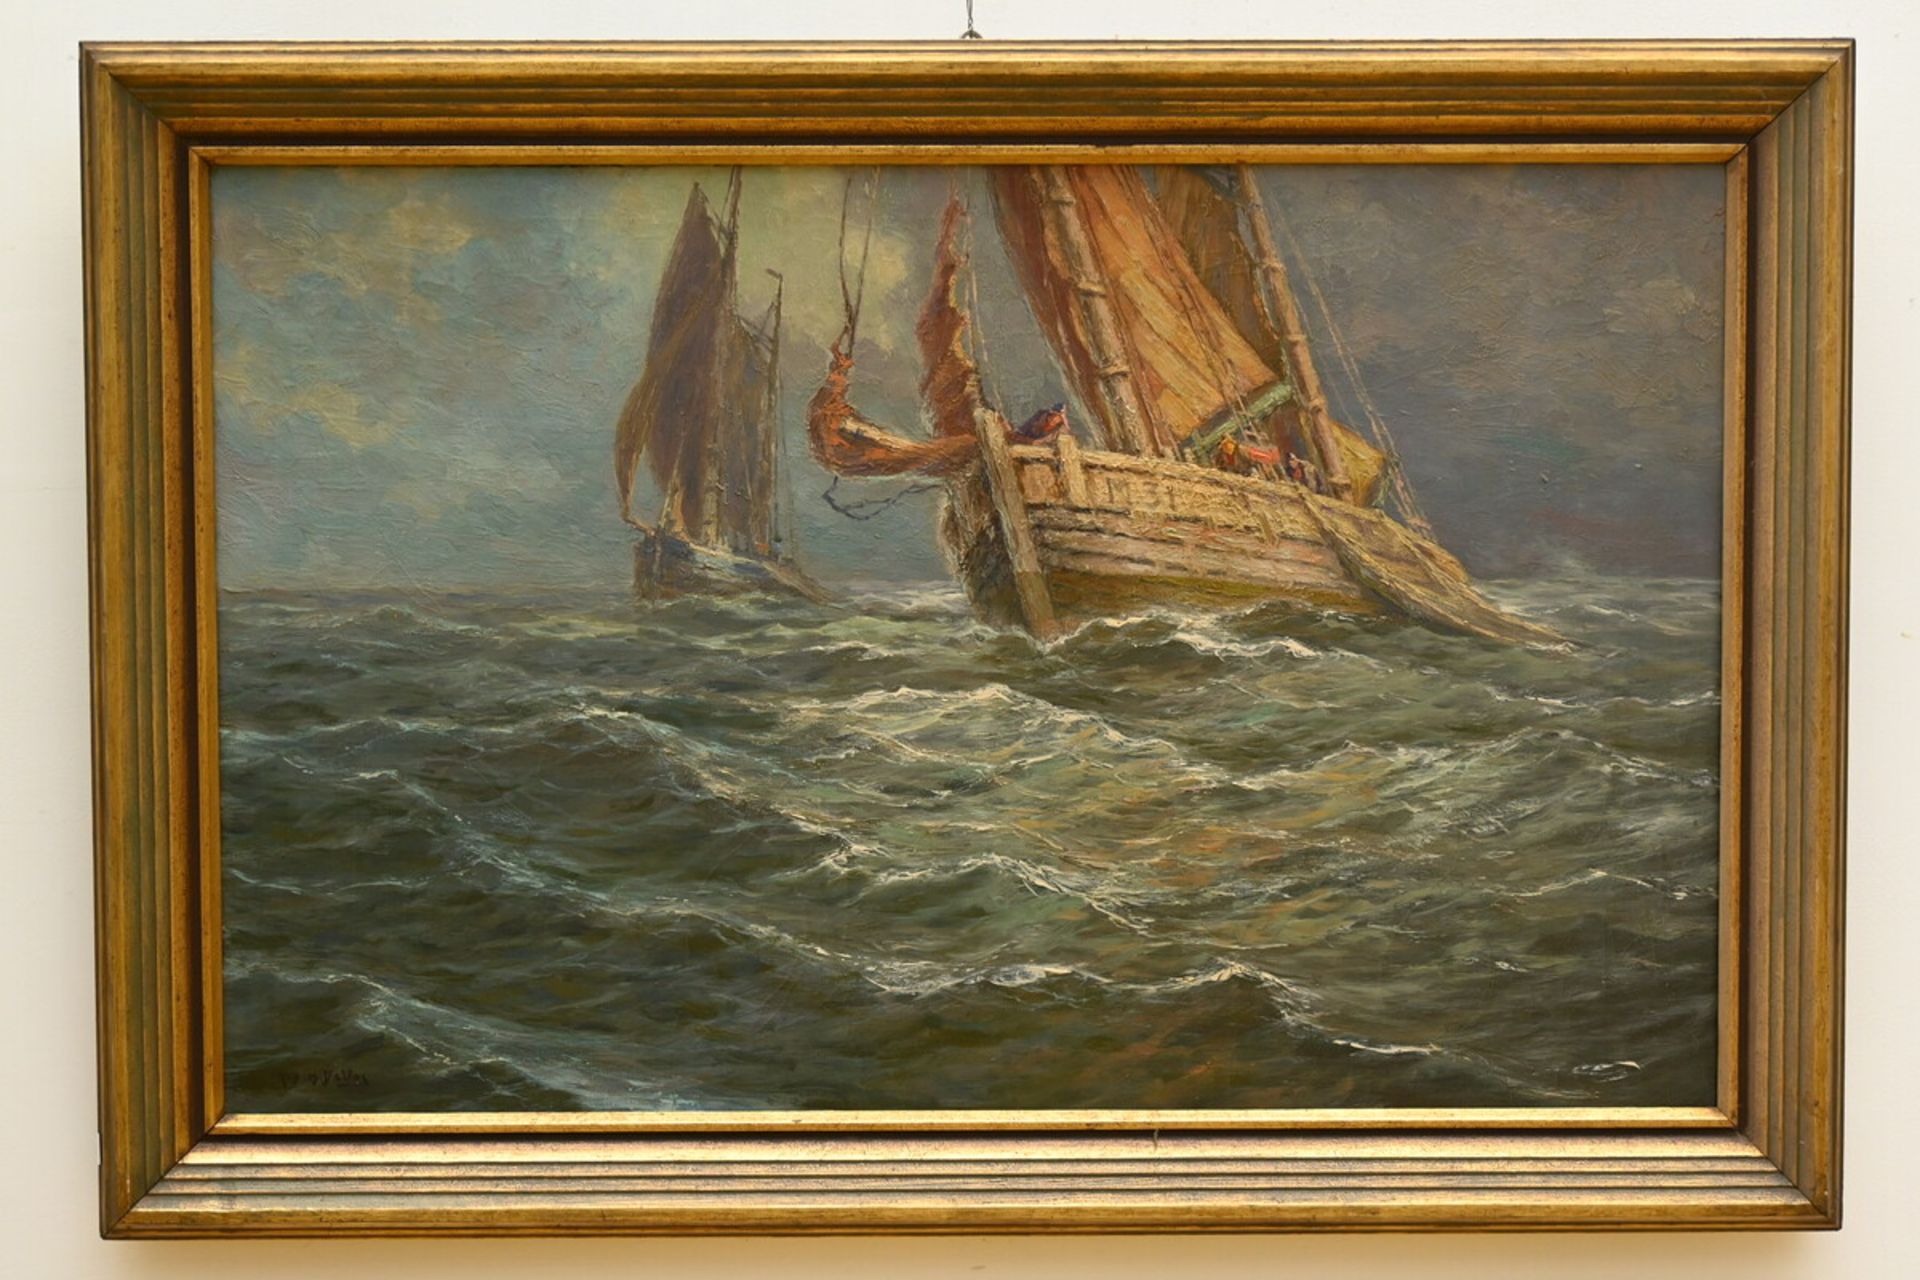 Albert Isidore De Vos: painting (o/c) 'fishermen on a rough sea' (71x111cm) - Image 2 of 3